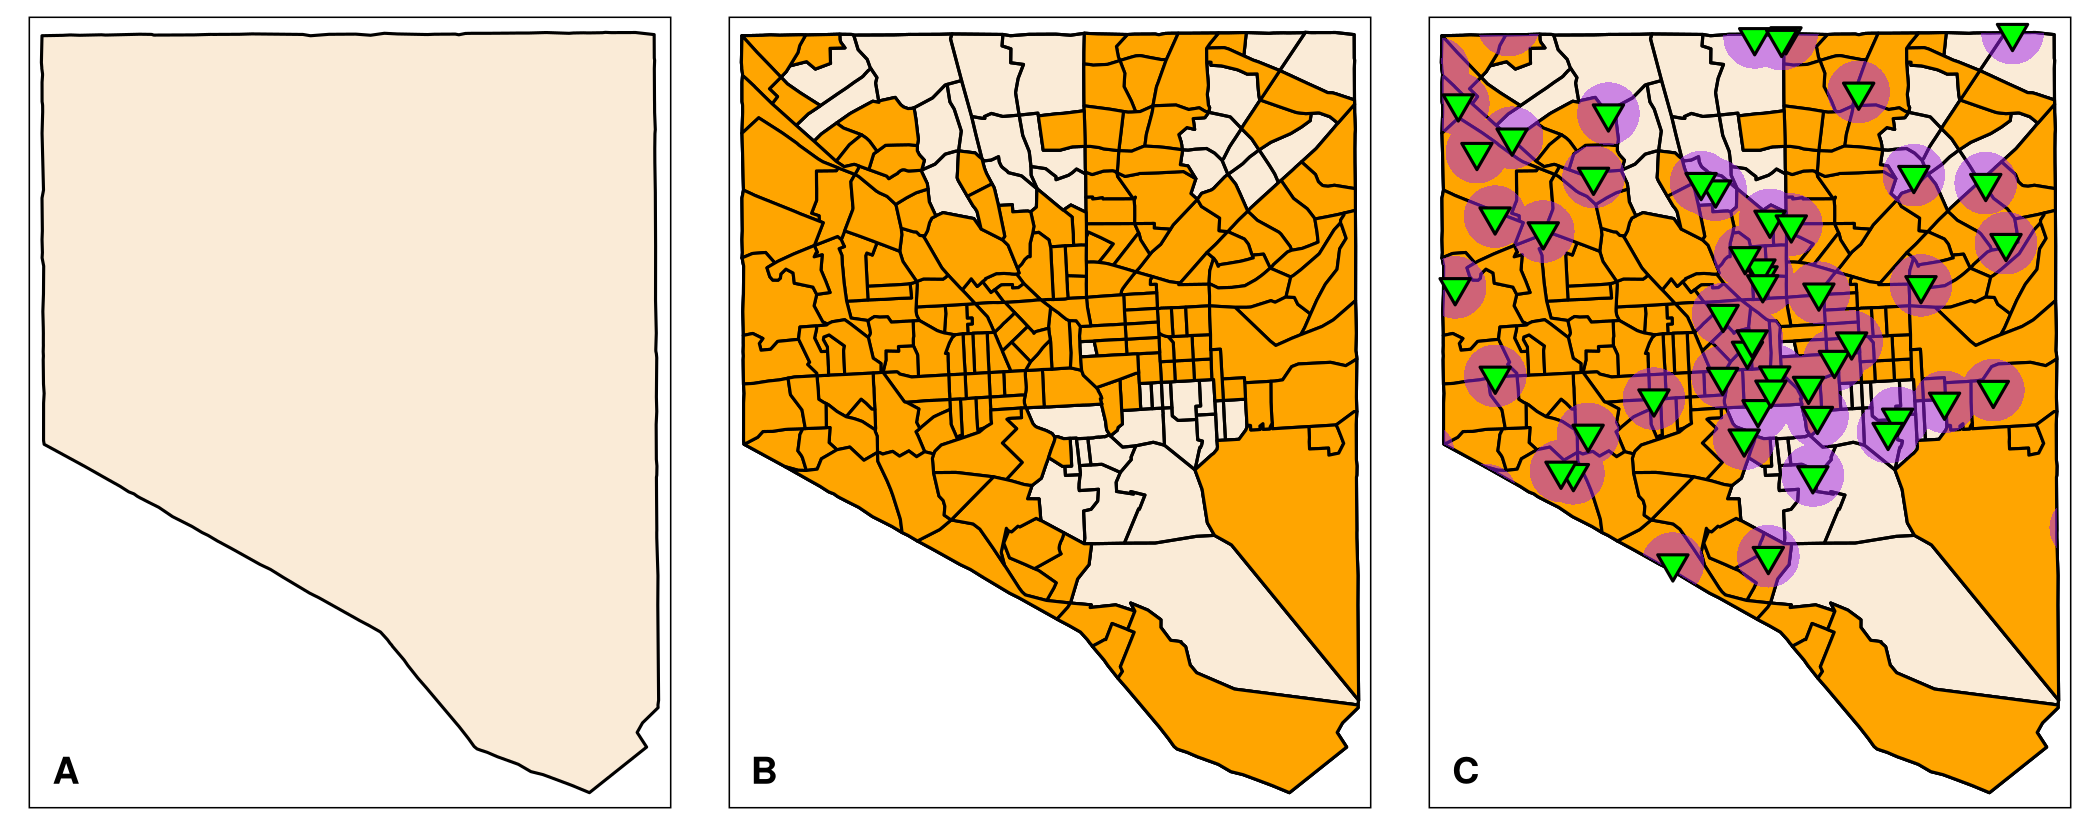 Three maps of Baltimore City showing its low-income areas and vaccination sites